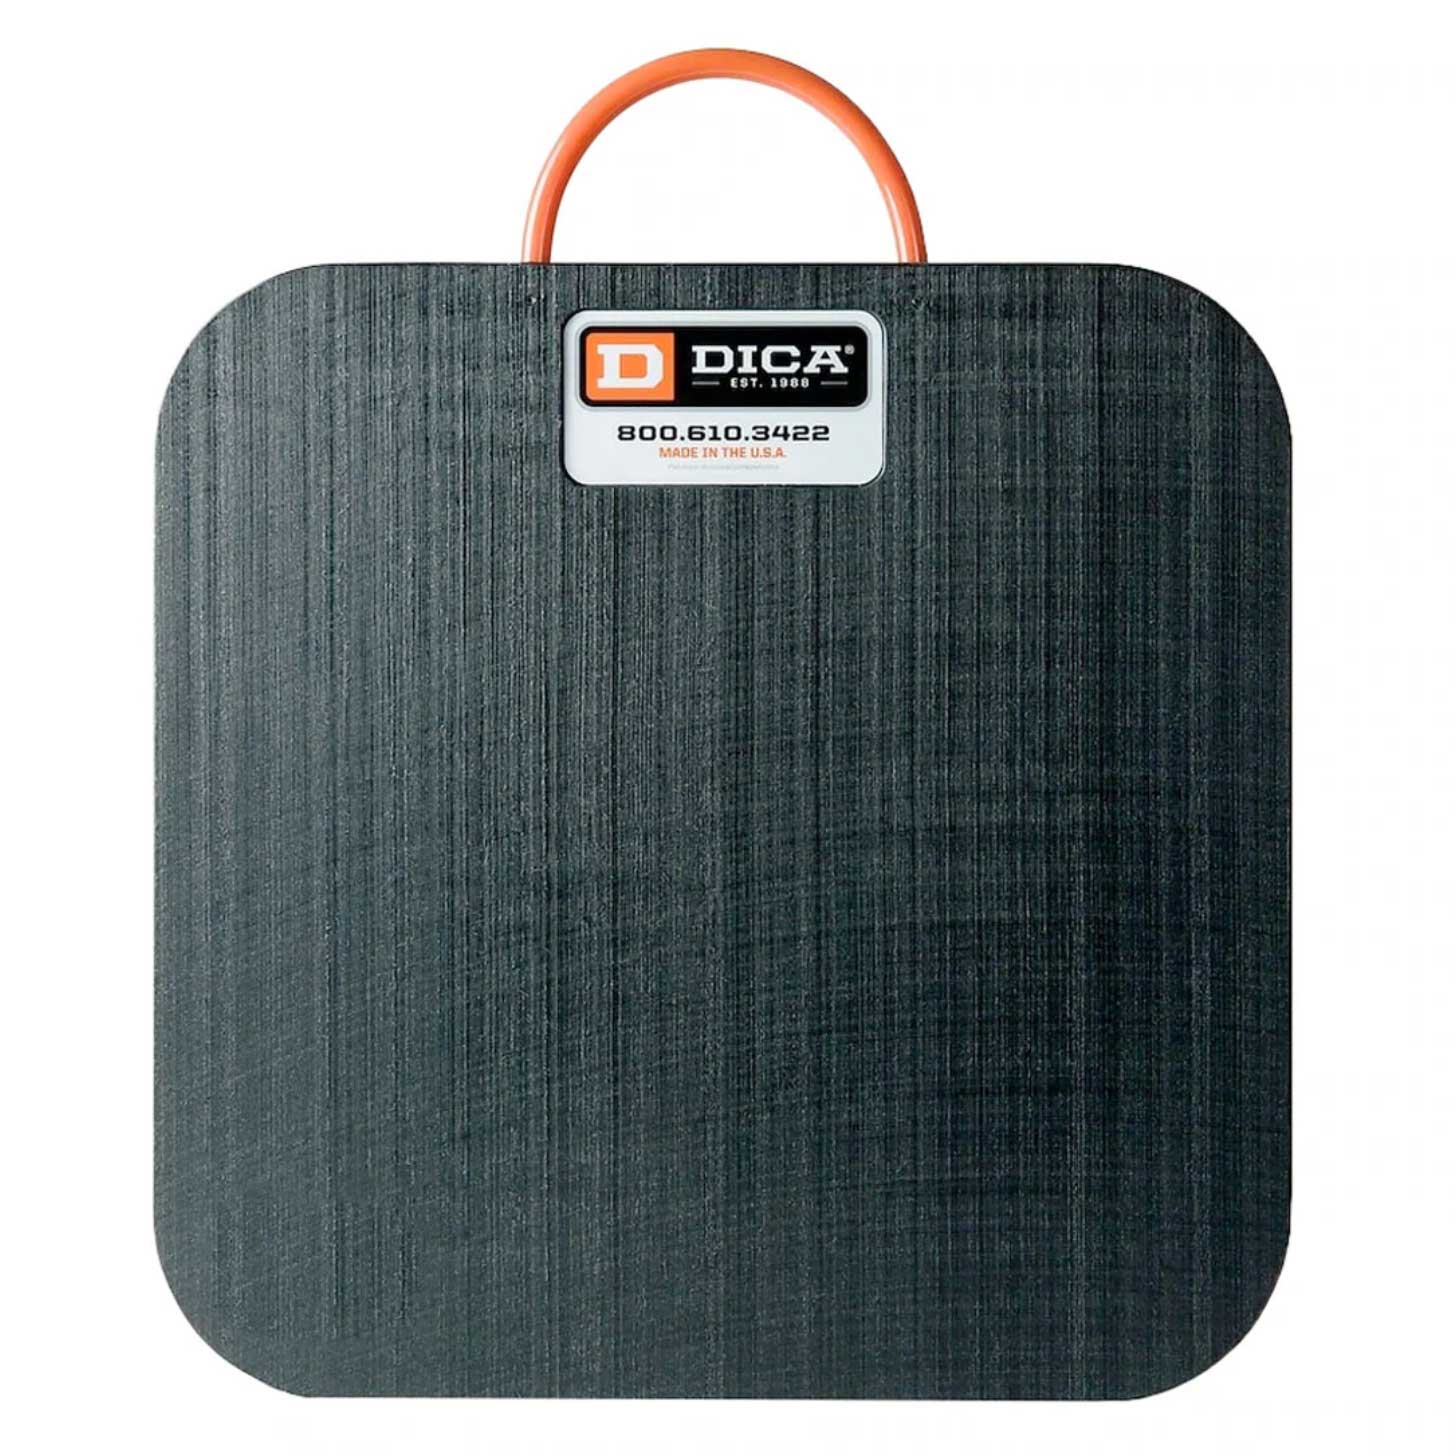 SafetyTech® 15" x 15" Outrigger Pad | Heavy Duty | 2" Thick | Black Image 1 of 3